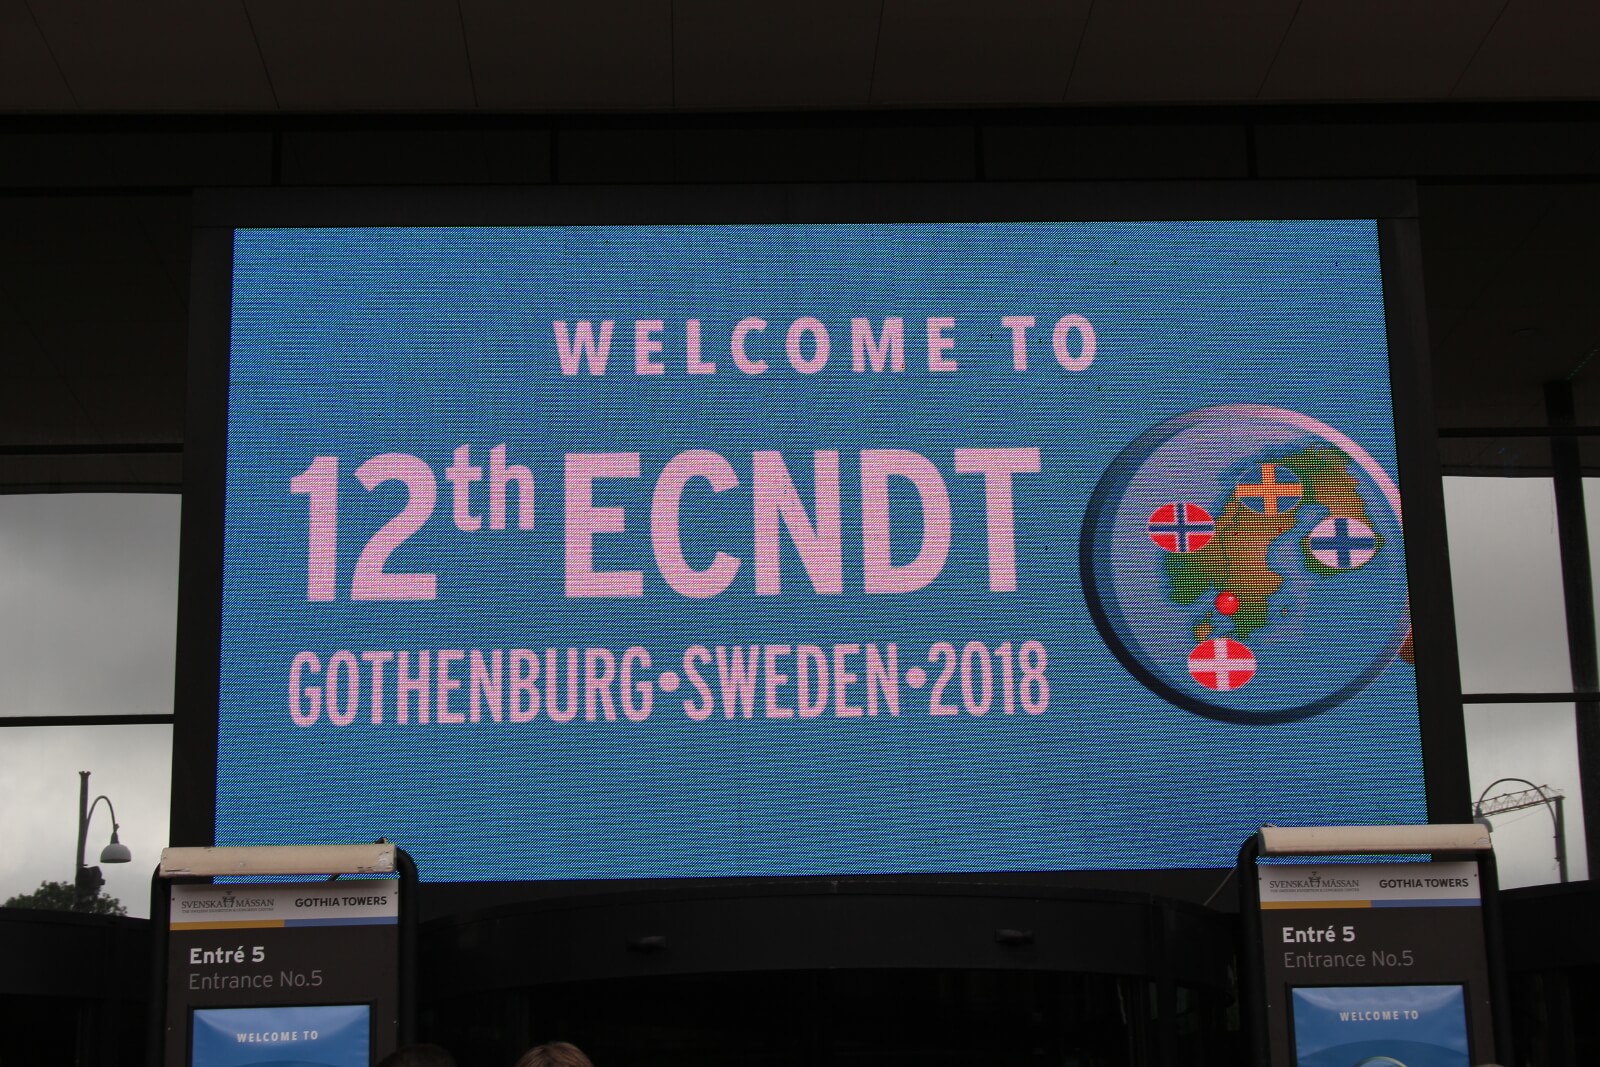 Exhibition Center of the 12th European conference of NDT in Gothenburg city (Sweden) welcomes participants and guests of the forum